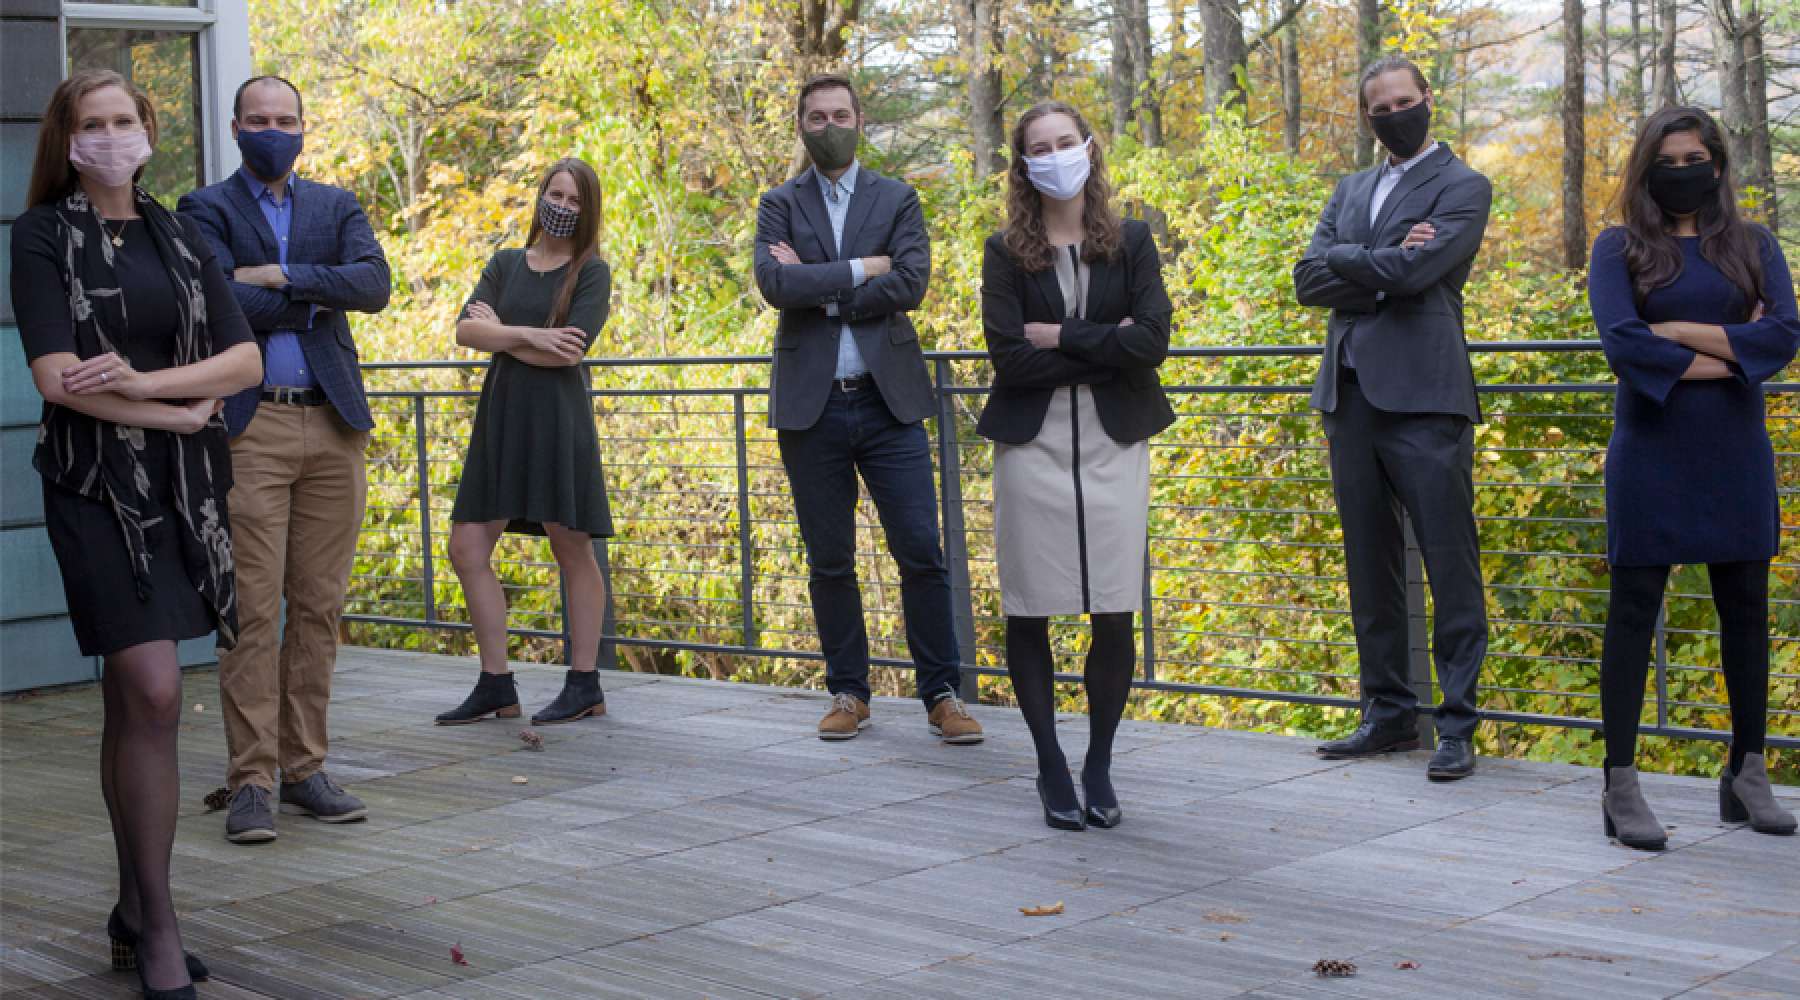 TSVF 2020-2021 Co-Chairs pose for a group photo outside, wearing masks